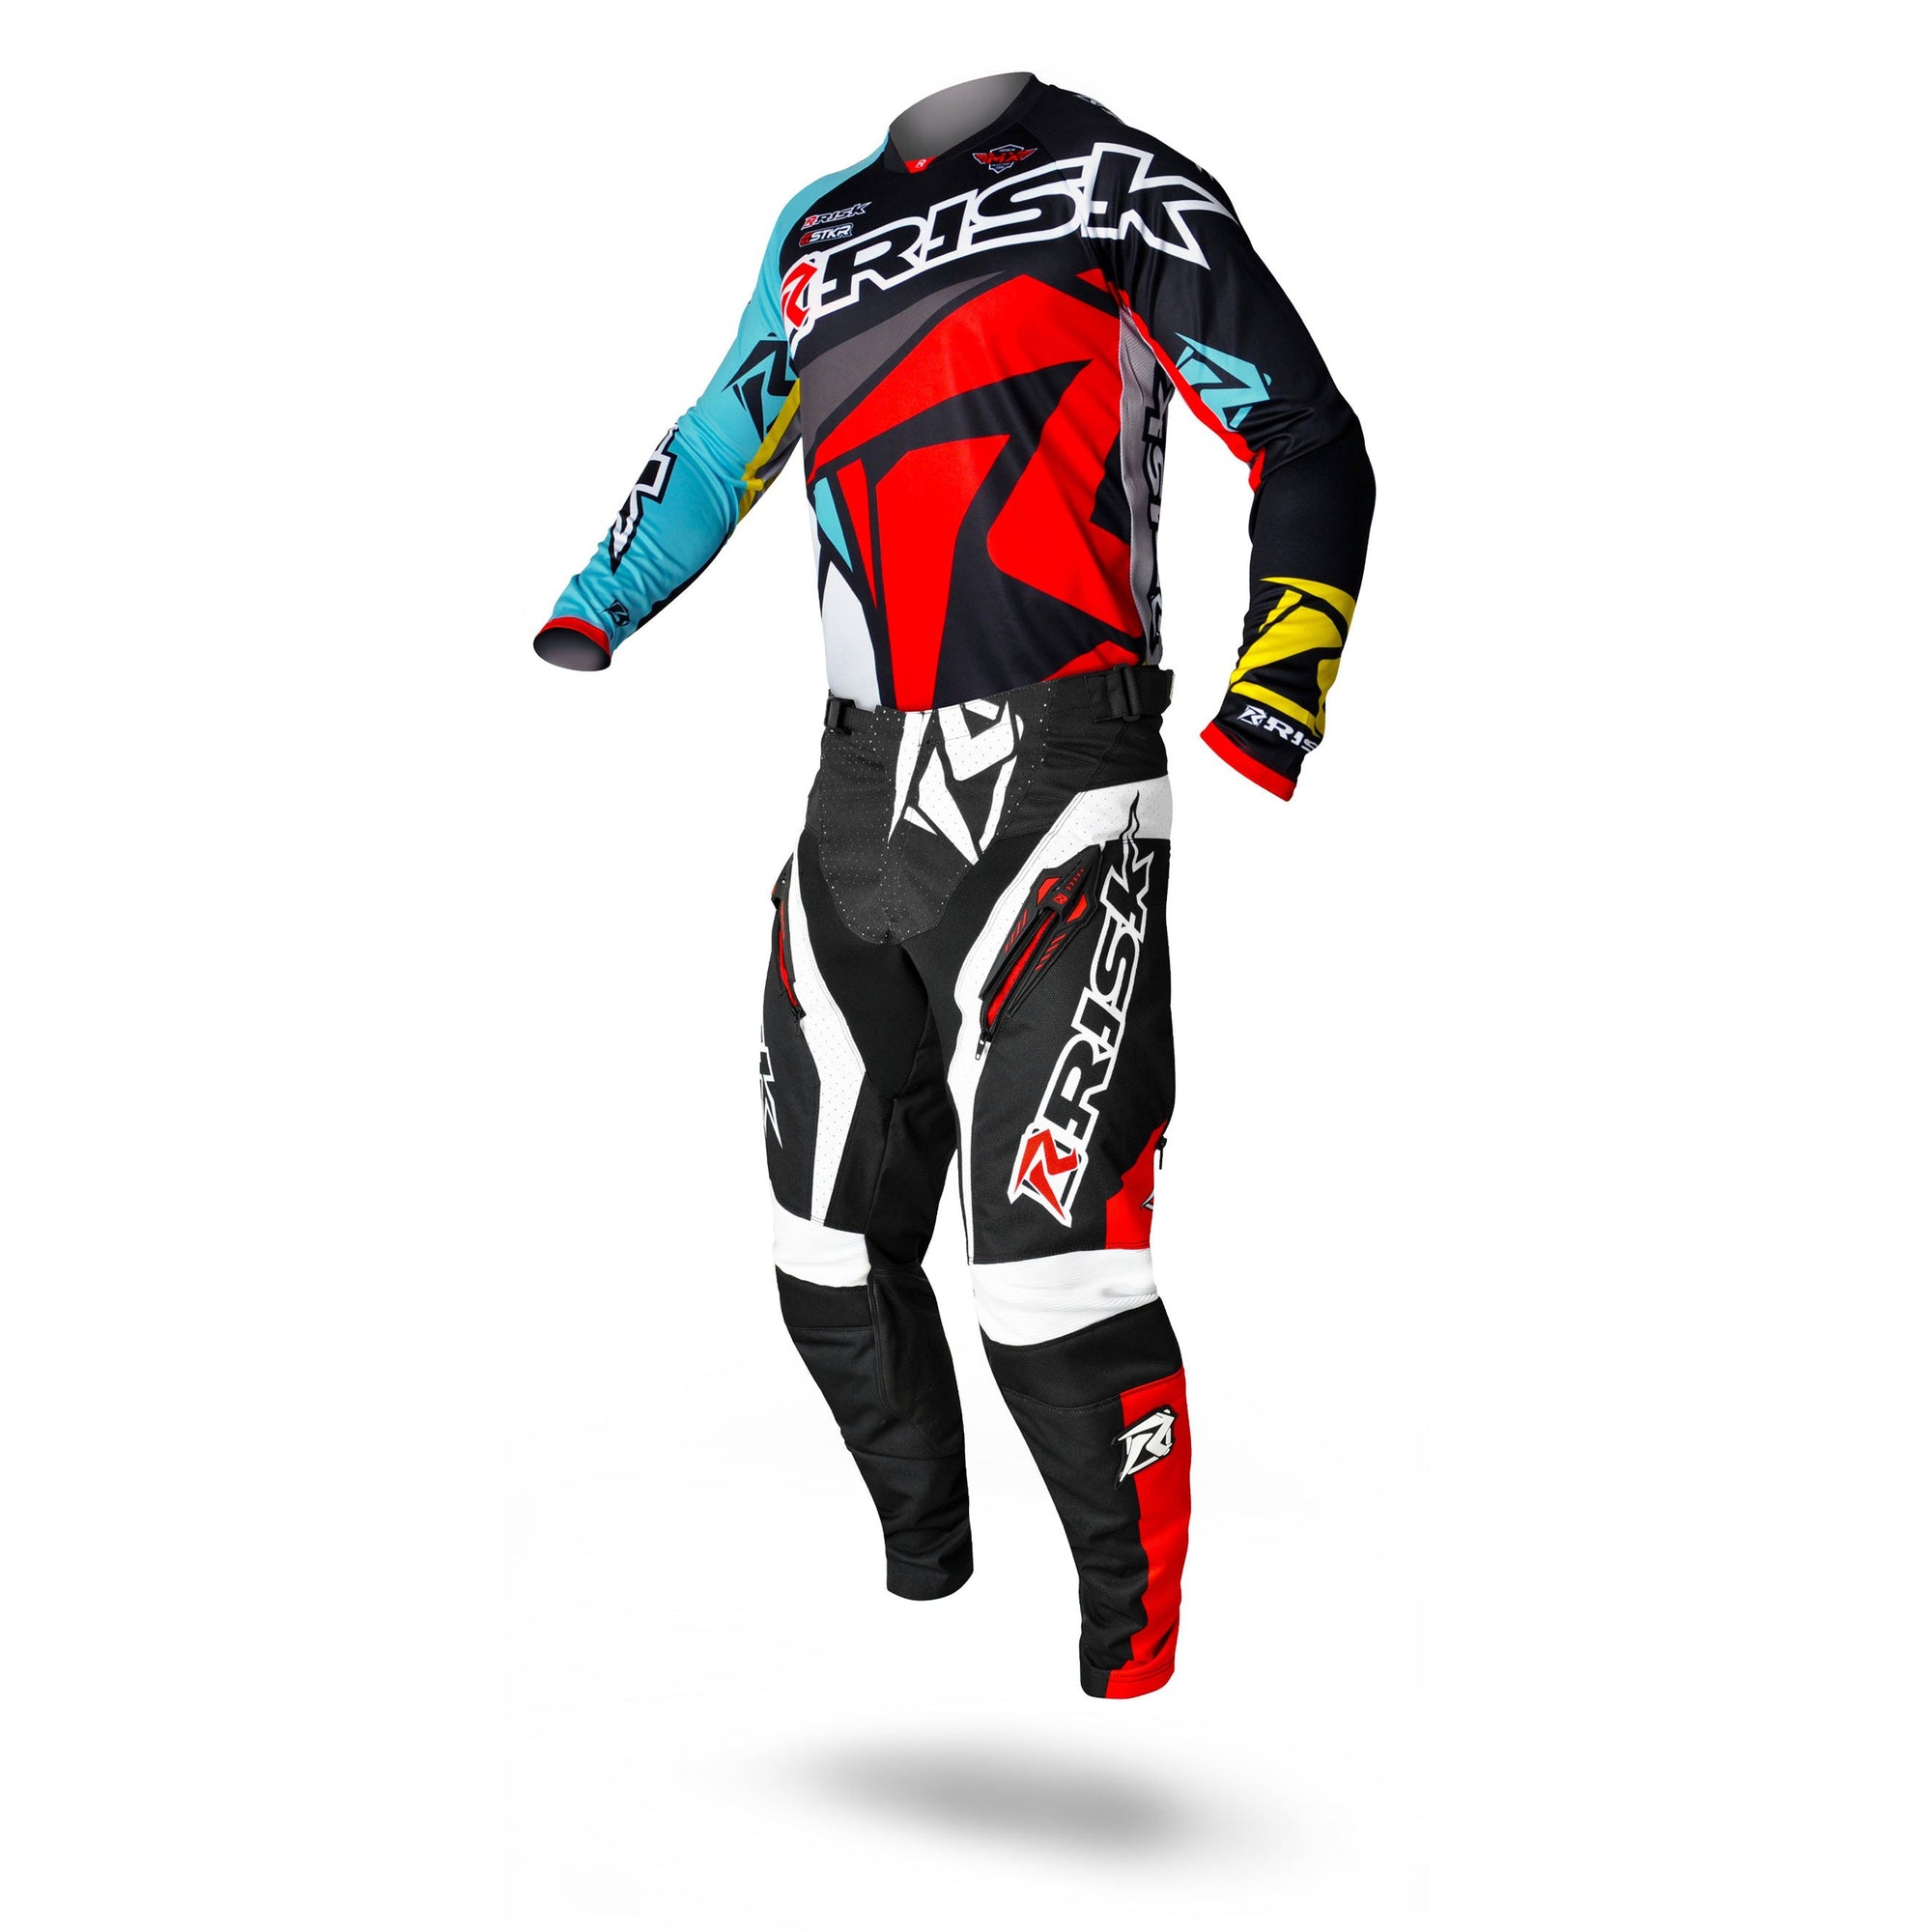 Risk Racing VENTilate V2 Jersey - Black/Red/Yellow - Motocross Riding Gear - Front